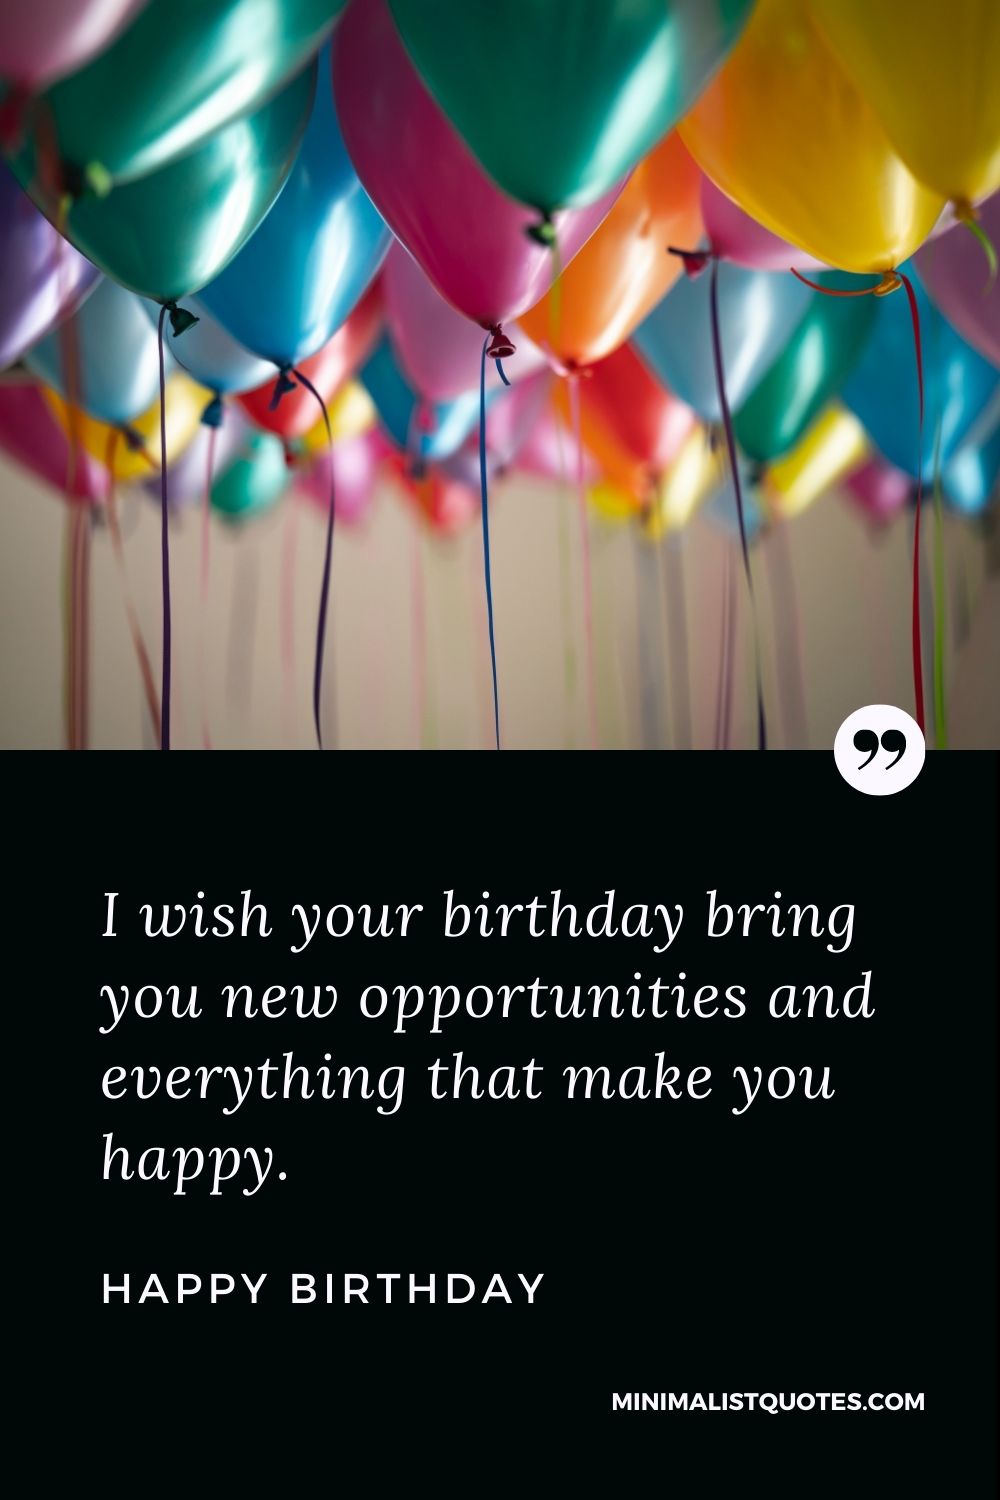 Happy Birthday Wishes - I wish your birthday bring you new opportunities and everything that make you happy.